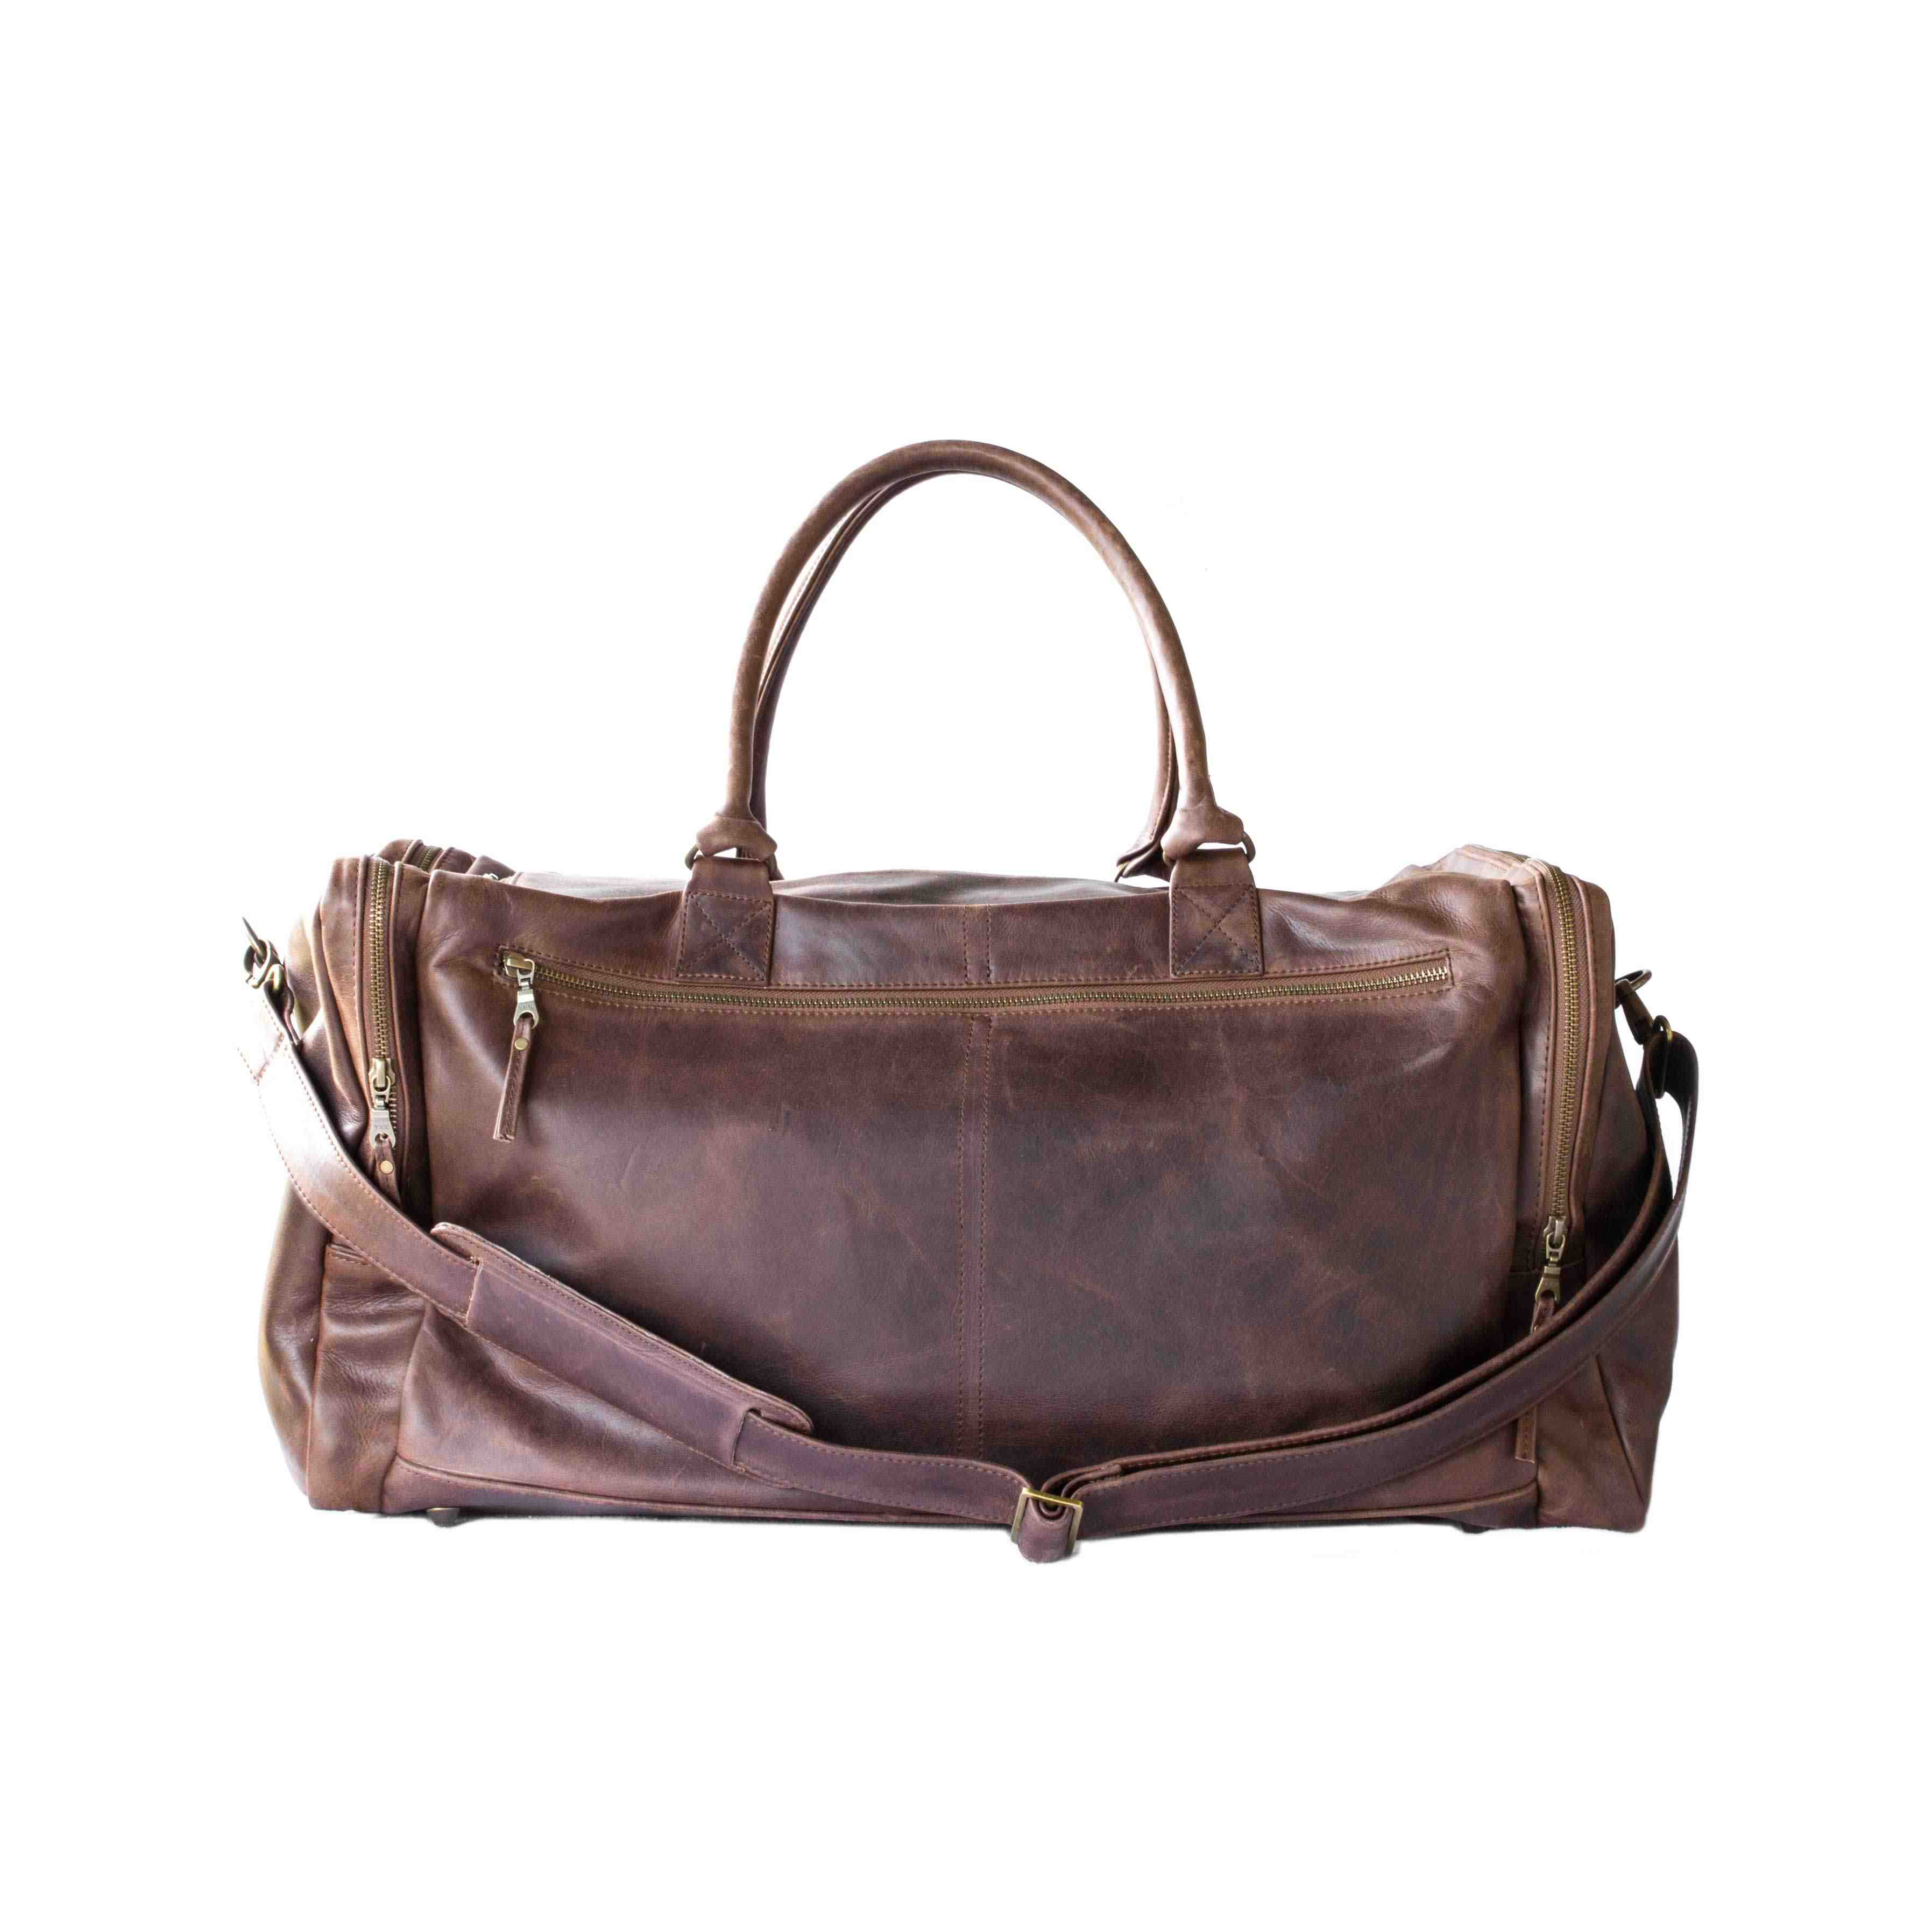 Duffle Bags - Mally Philip Leather Travel Duffel Bag | Brown was sold for R3,800.00 on 2 Sep at ...